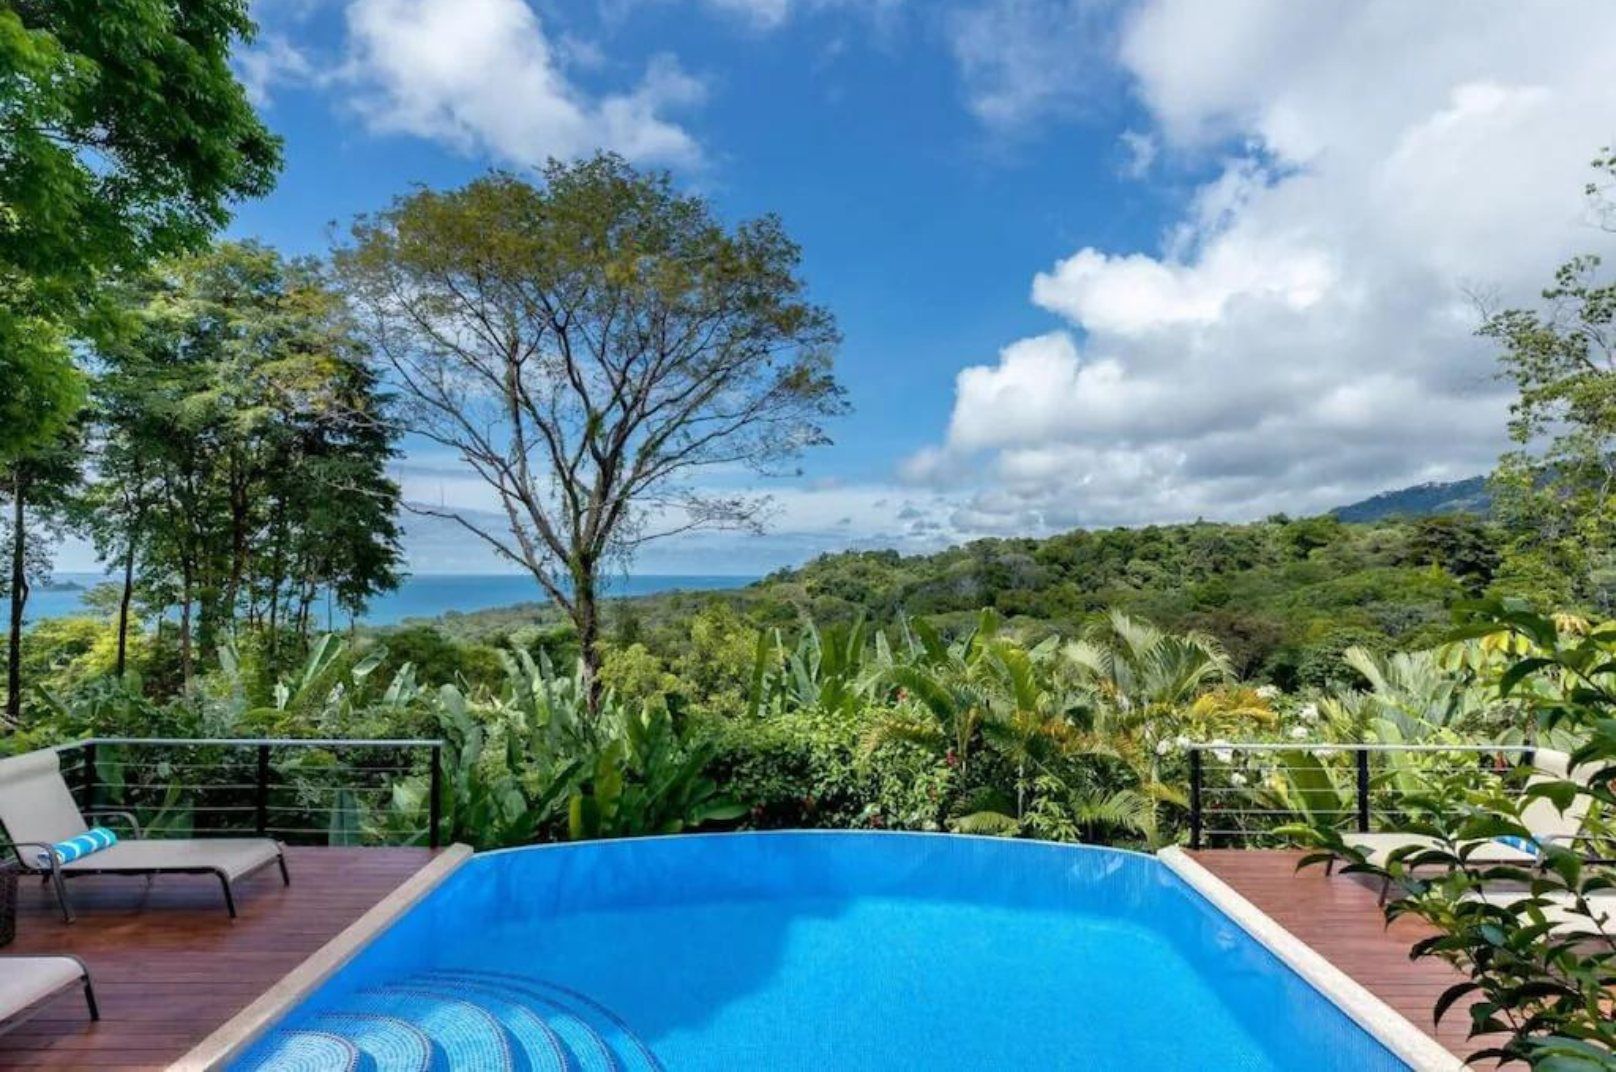 Costa Rica vacation rentals for large groups